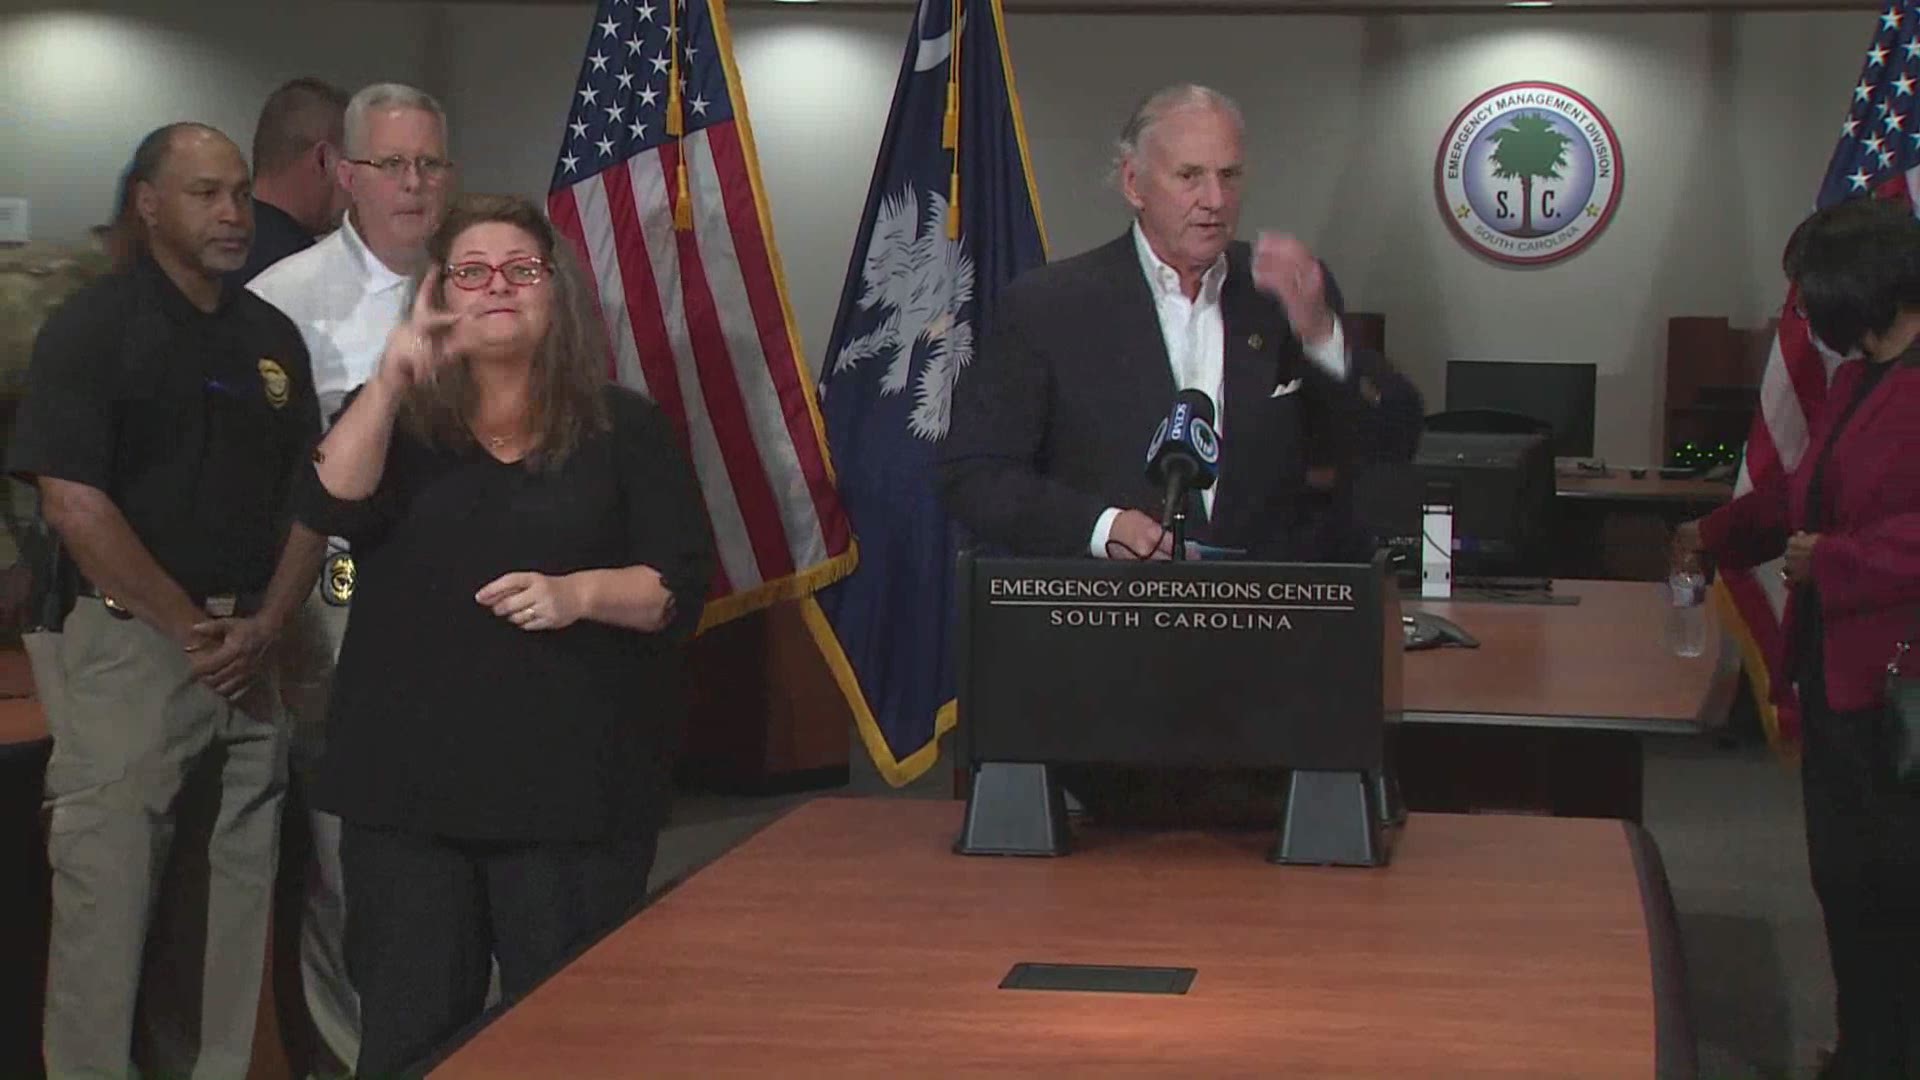 In a press conference Sunday afternoon, South Carolina Governor Henry McMaster, state and community leaders called for peaceful protests.